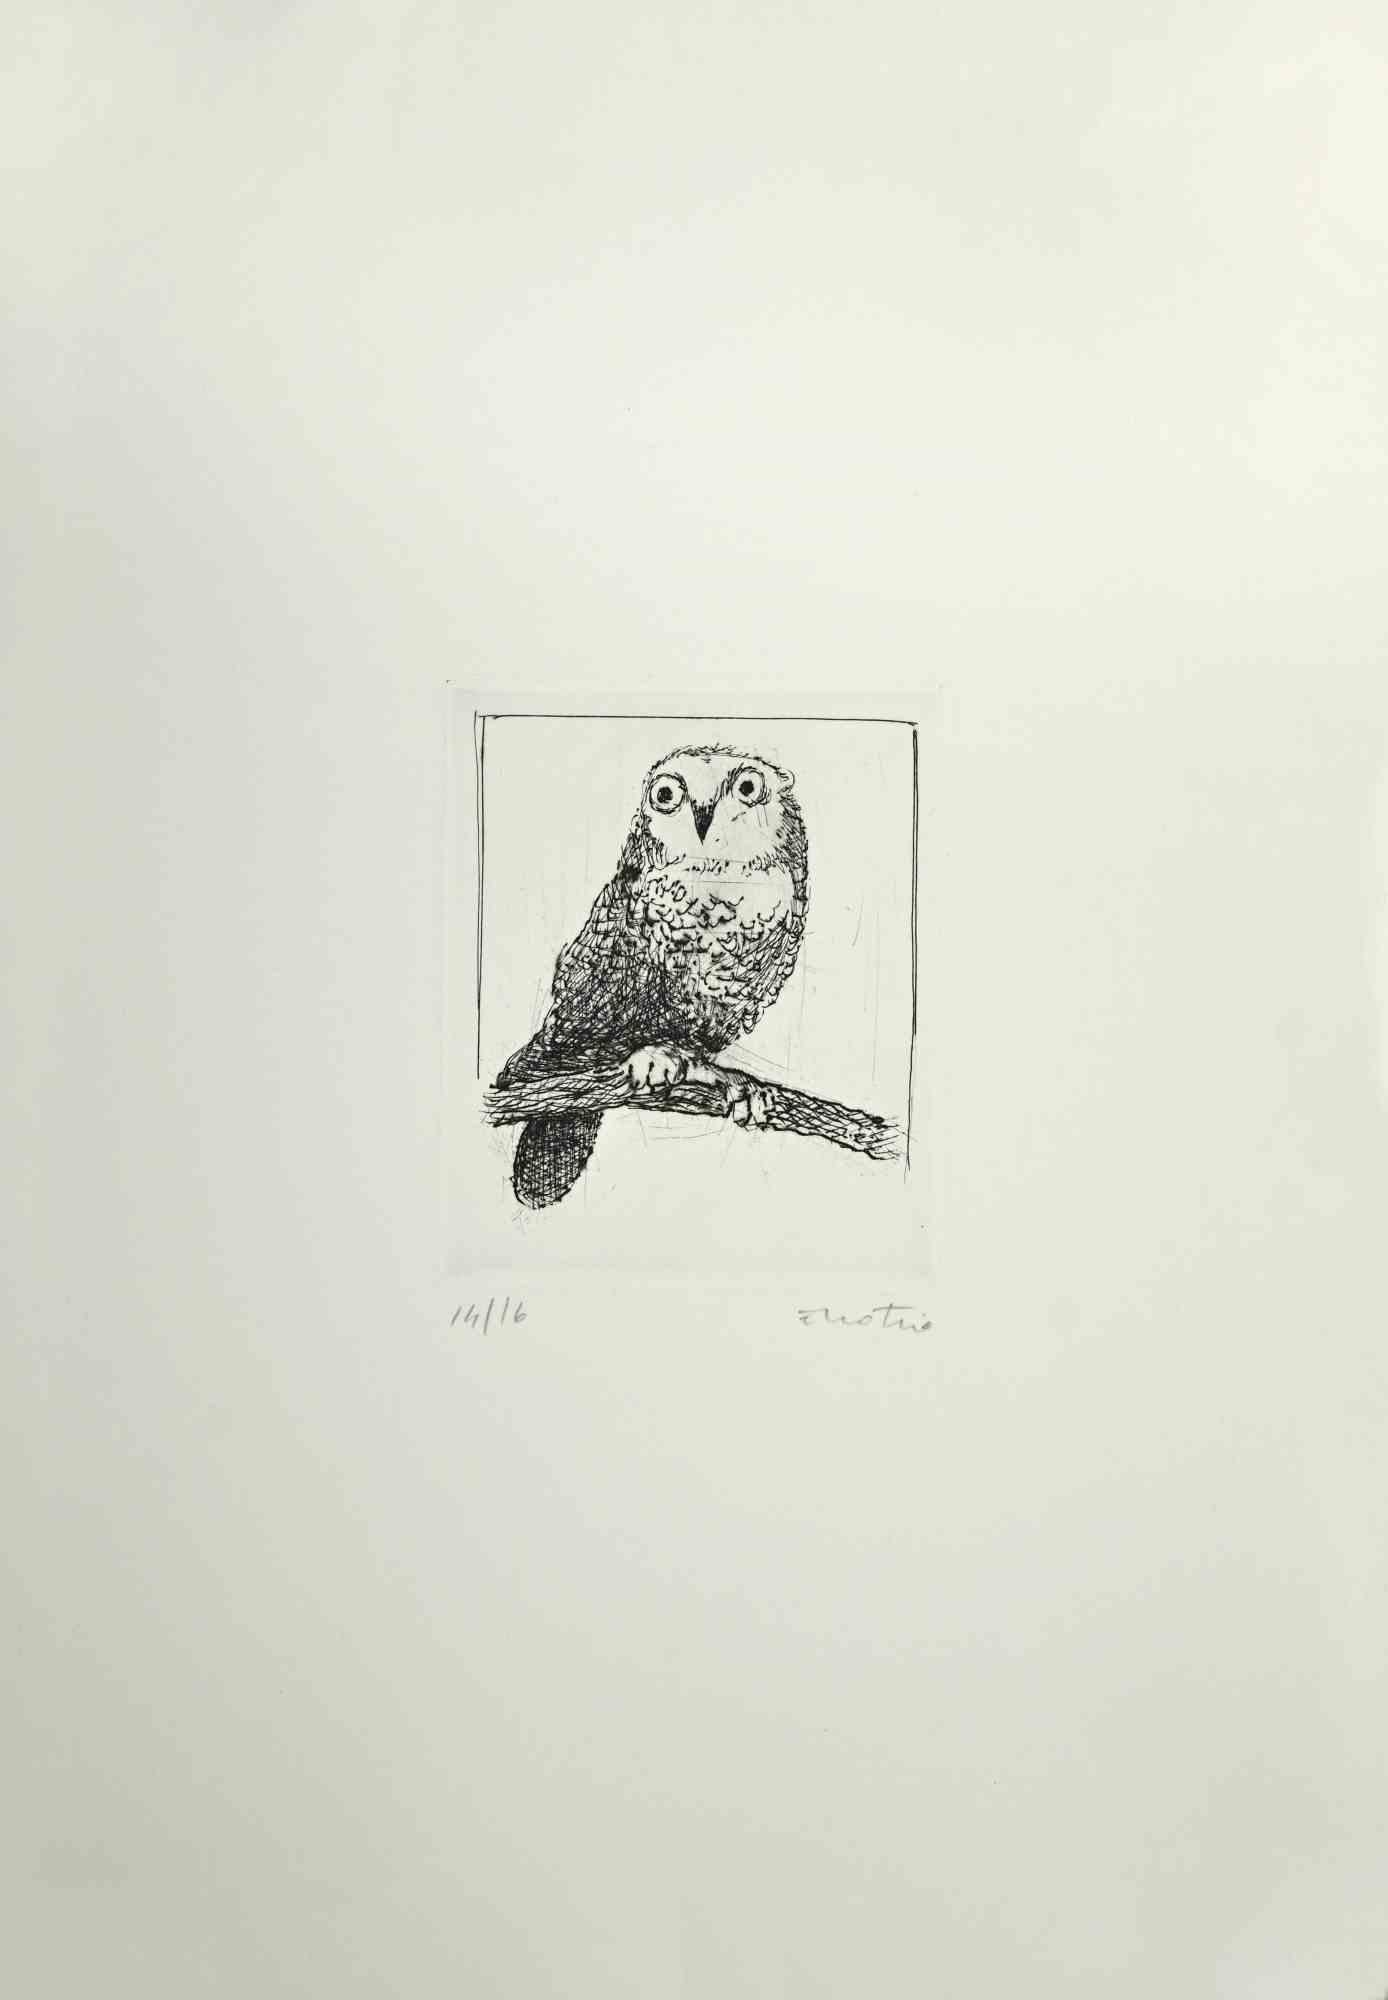 Owl is an Etching and Aquatint realized by Enotrio Pugliese in 1970s.

Limited edition of 16 copies numbered and signed by the artist.

Good conditions.

Enotrio Pugliese (May 11, 1920 - August 1989) was an Italian painter. Born in Buenos Aires to a